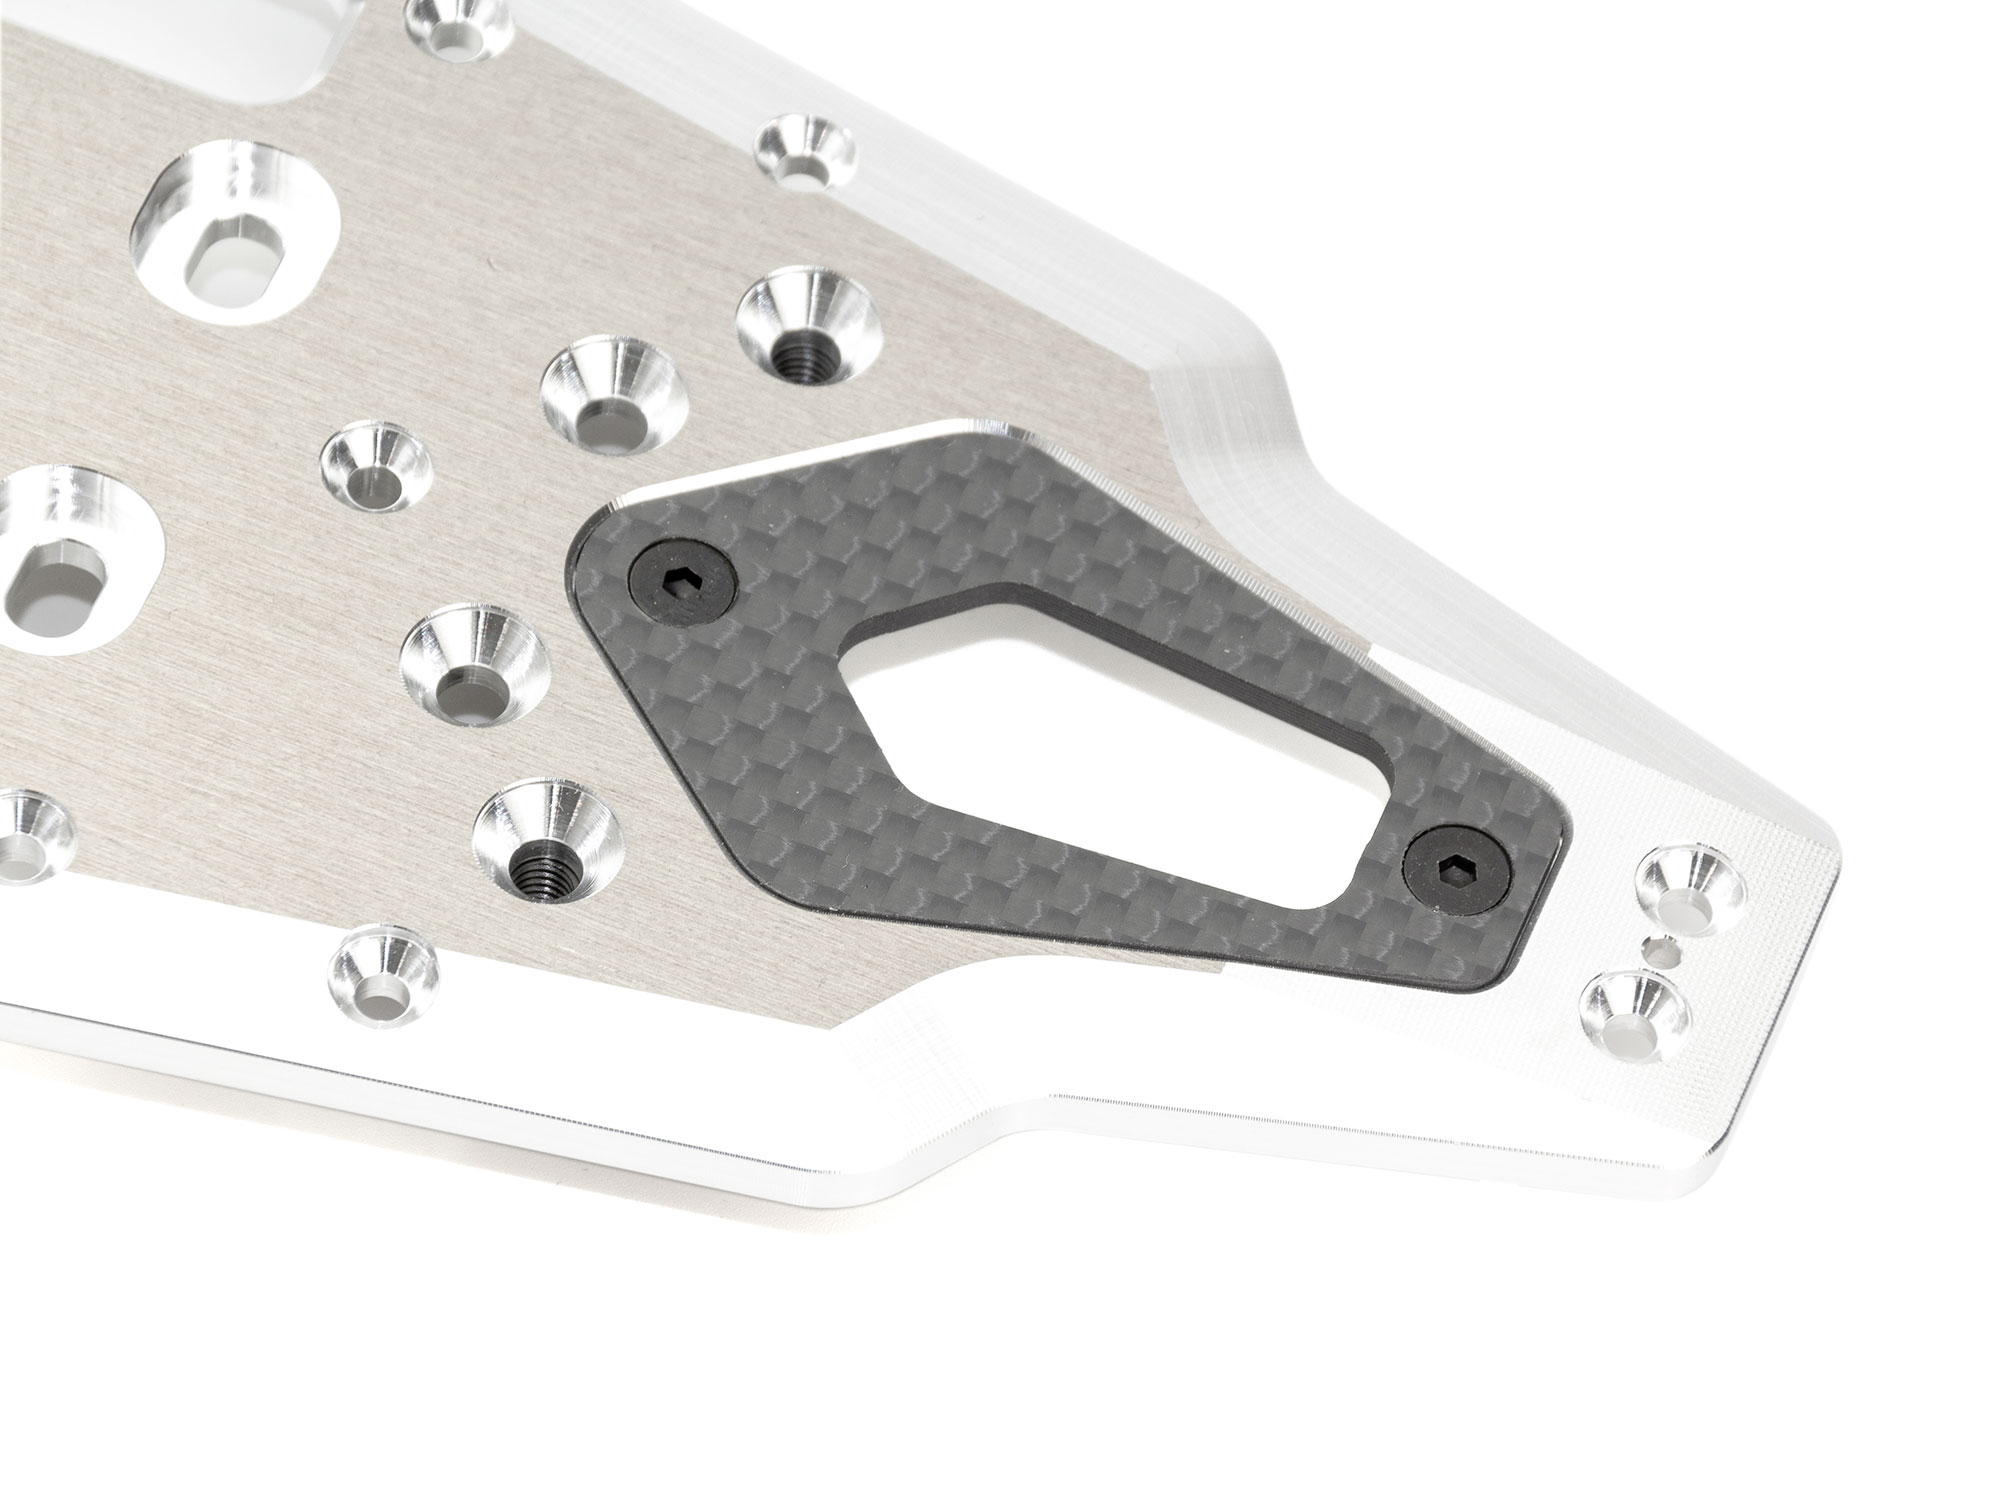 Newly designed chassis stiffener R